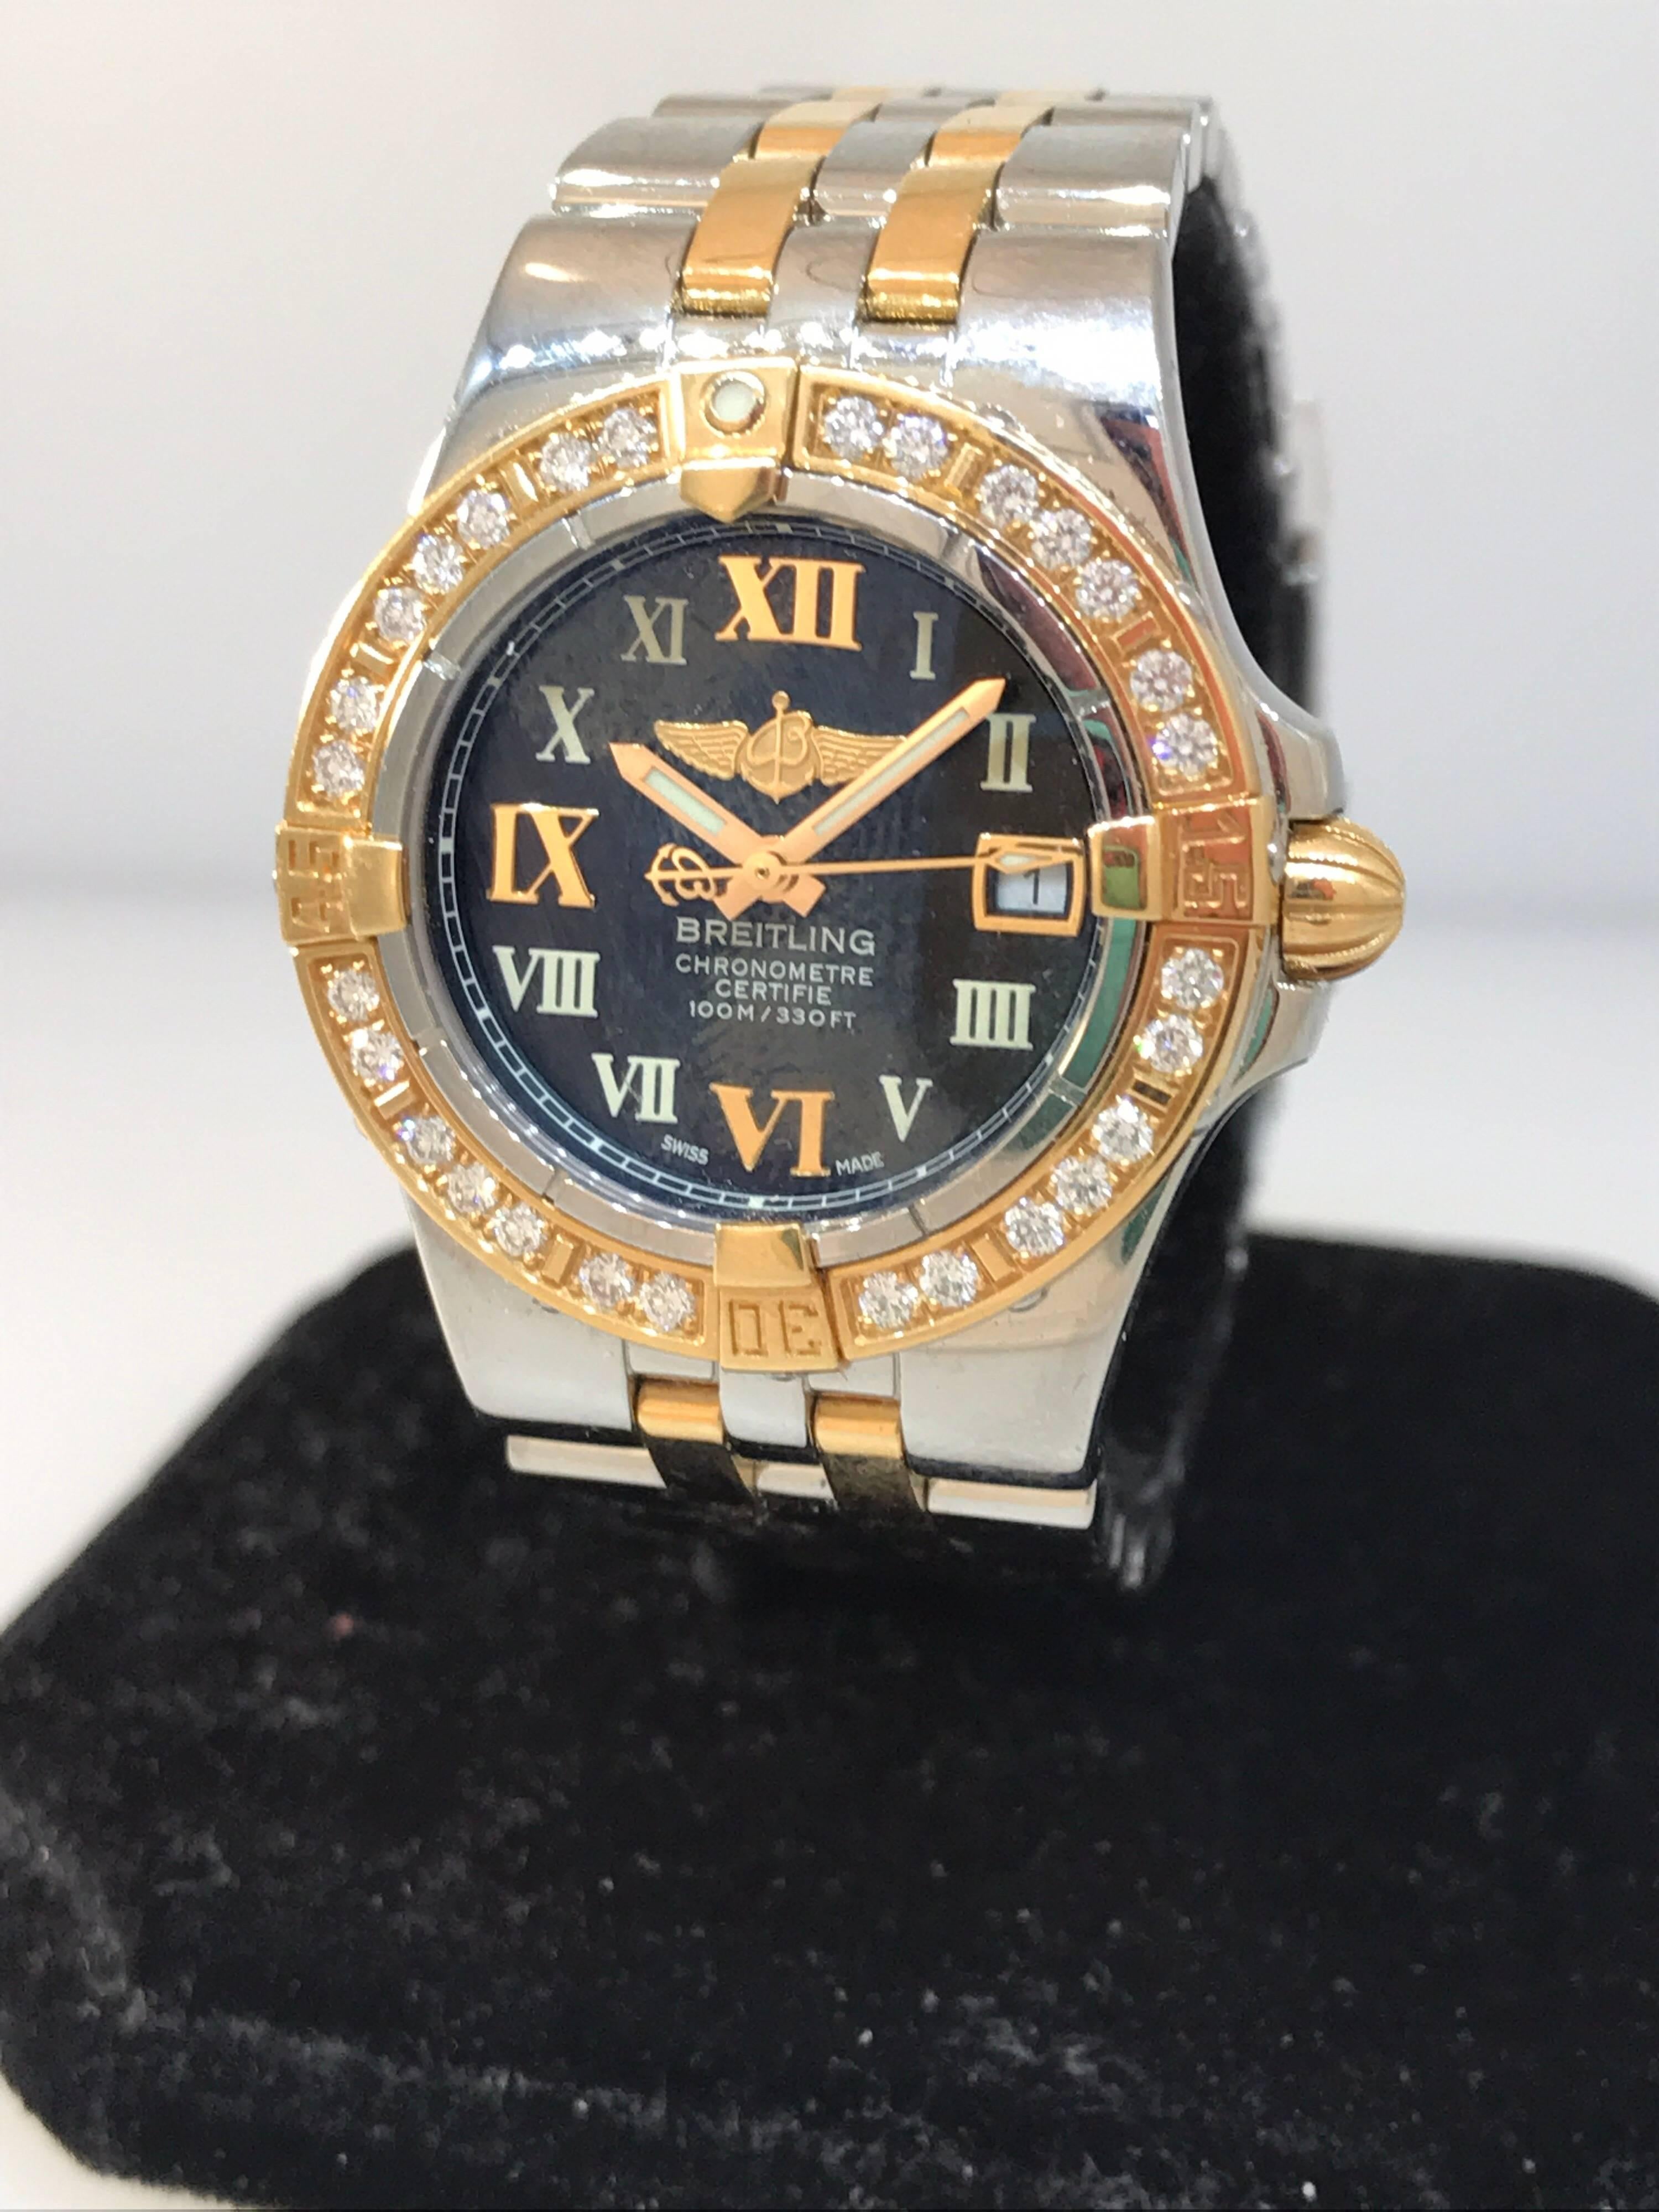 Breitling Galactic Lady's Watch

Model Number: C71340LA/B952-TT

100% Authentic

Brand New

Comes with original Breitling box, warranty, and instruction manual

Stainless Steel & 18 Karat Rose Gold Case & Bracelet

Diamond Bezel

Black Dial

Roman